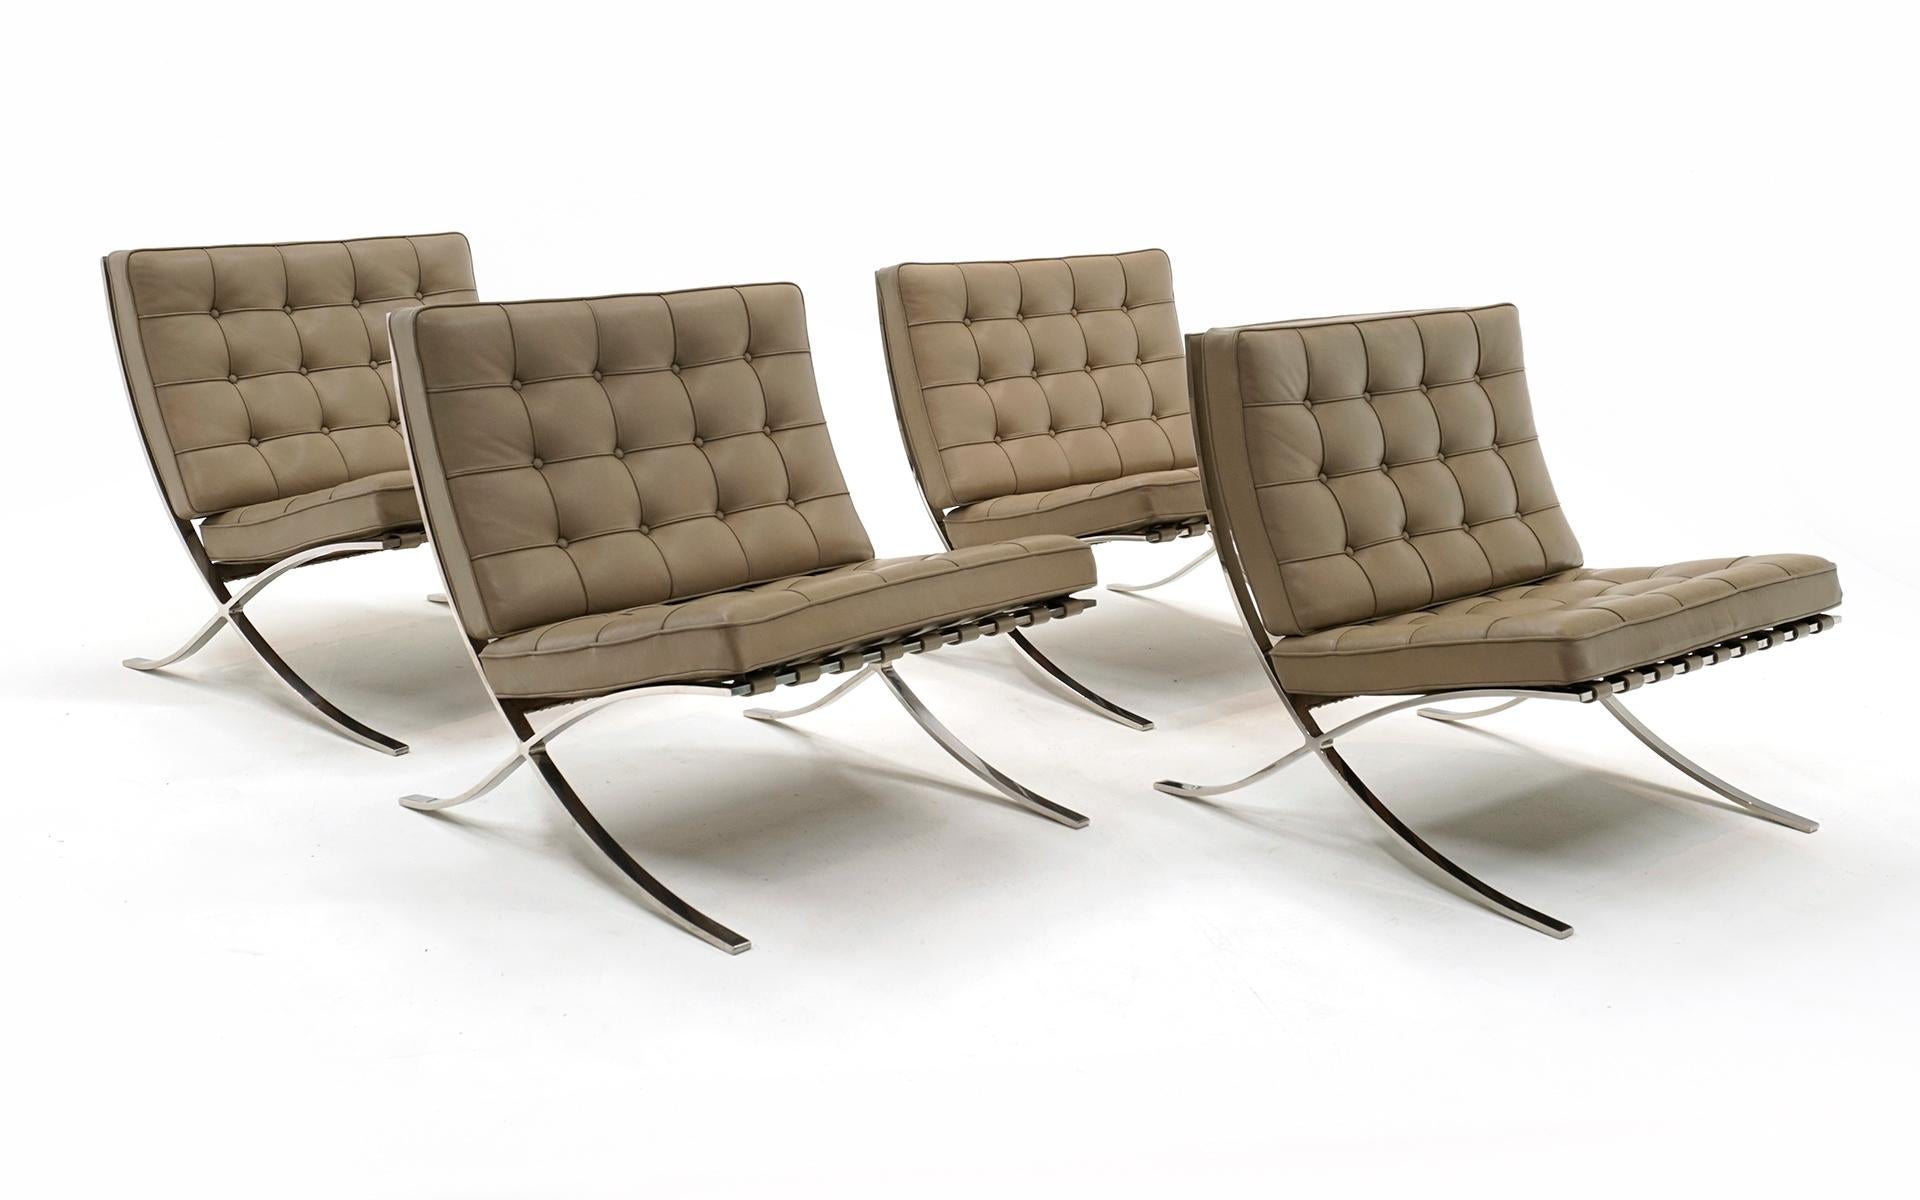 Bauhaus Knoll Barcelona Chairs by Ludwig Mies van der Rohe, Leather, Stainless Steel For Sale